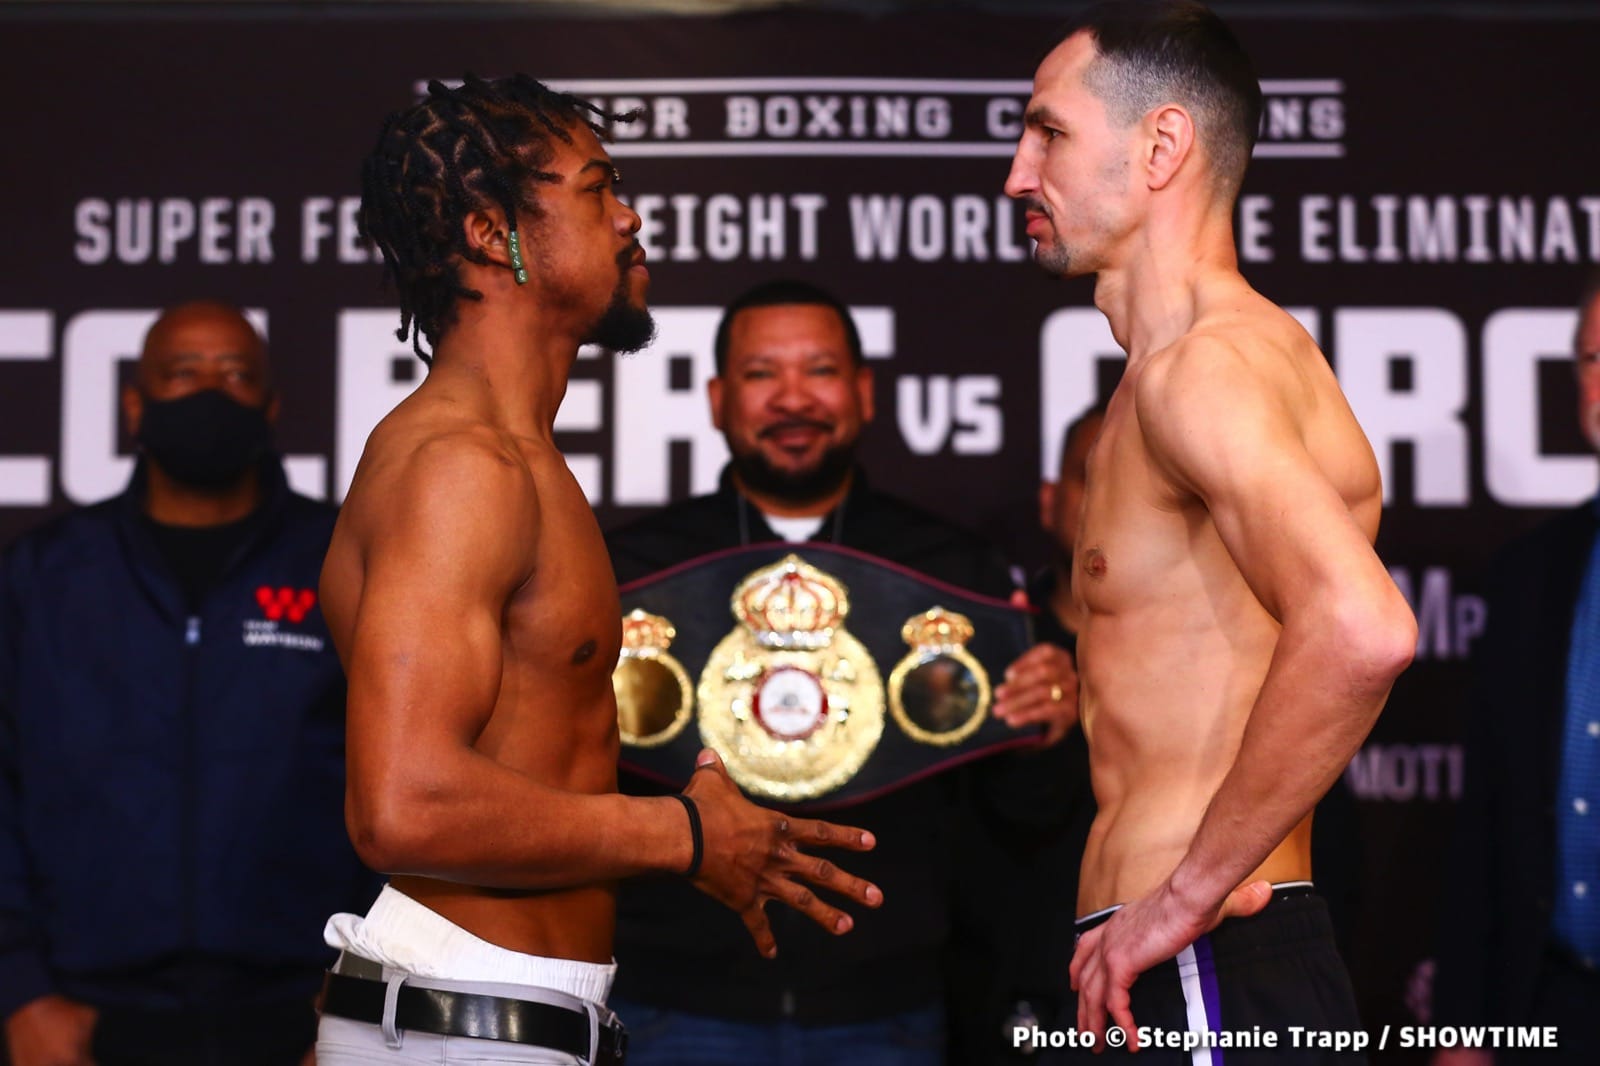 Image: Colbert Vs. Garcia Official Showtime Weights & Photos